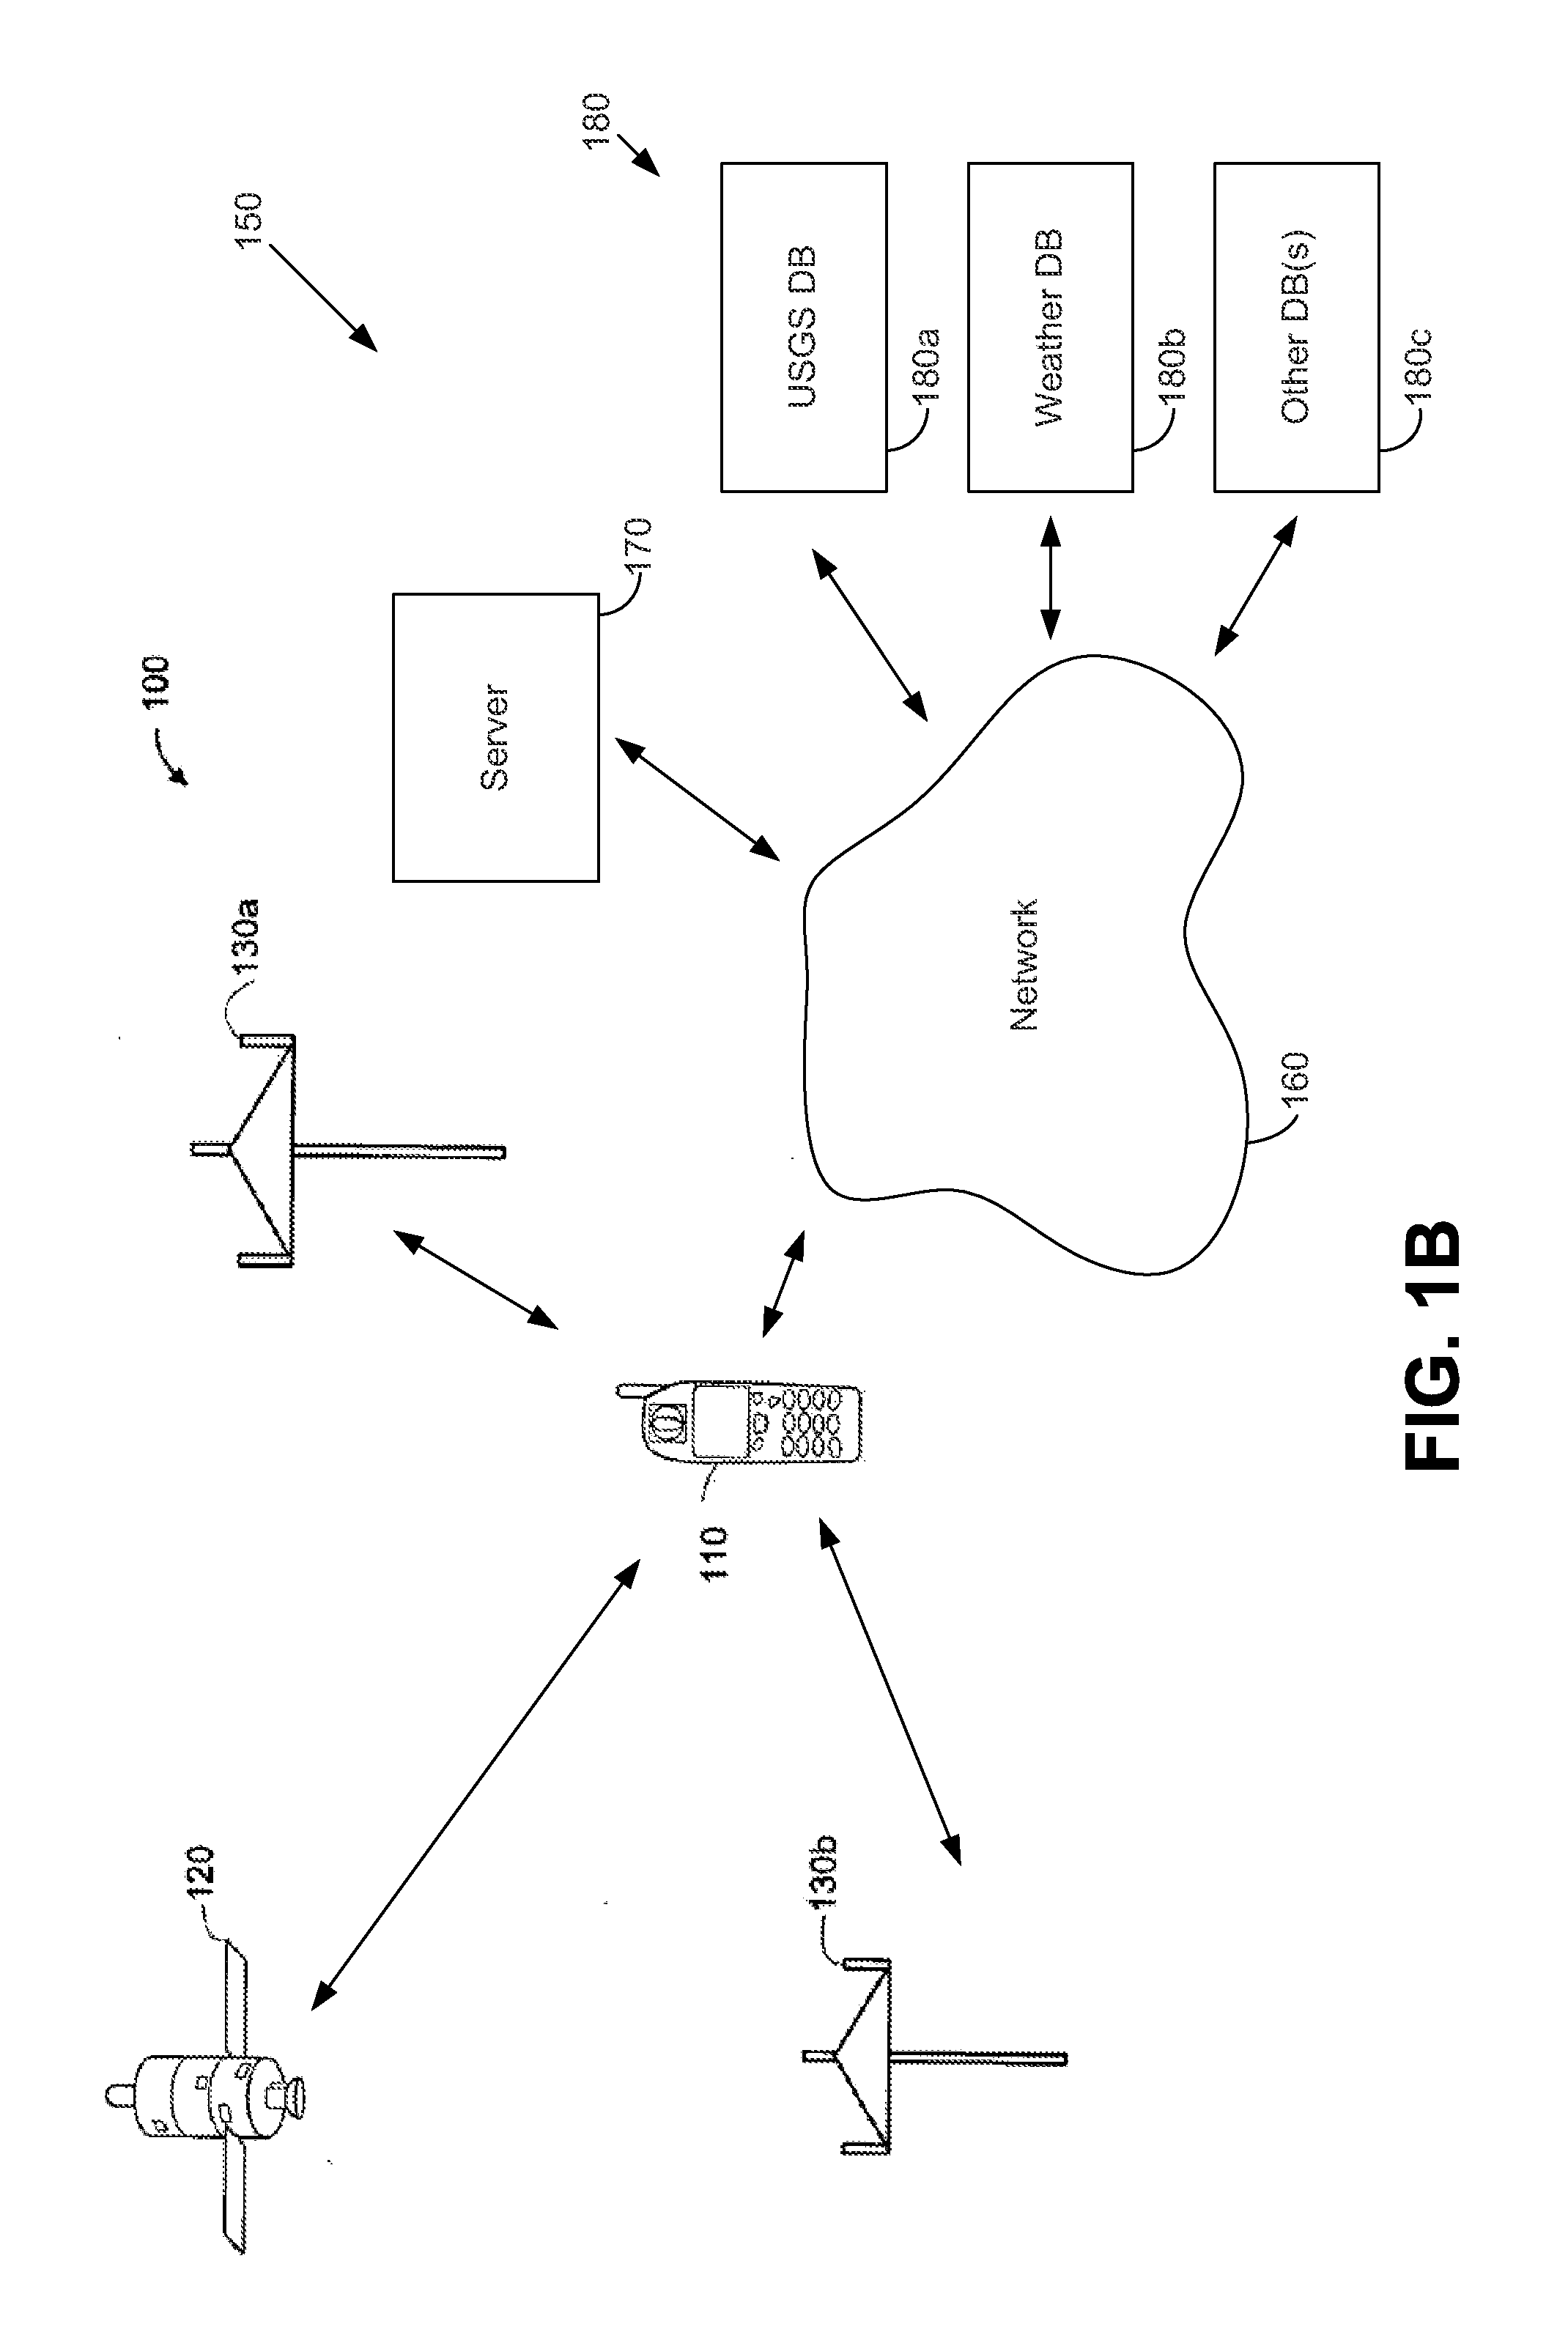 Apparatus and methods for height determination